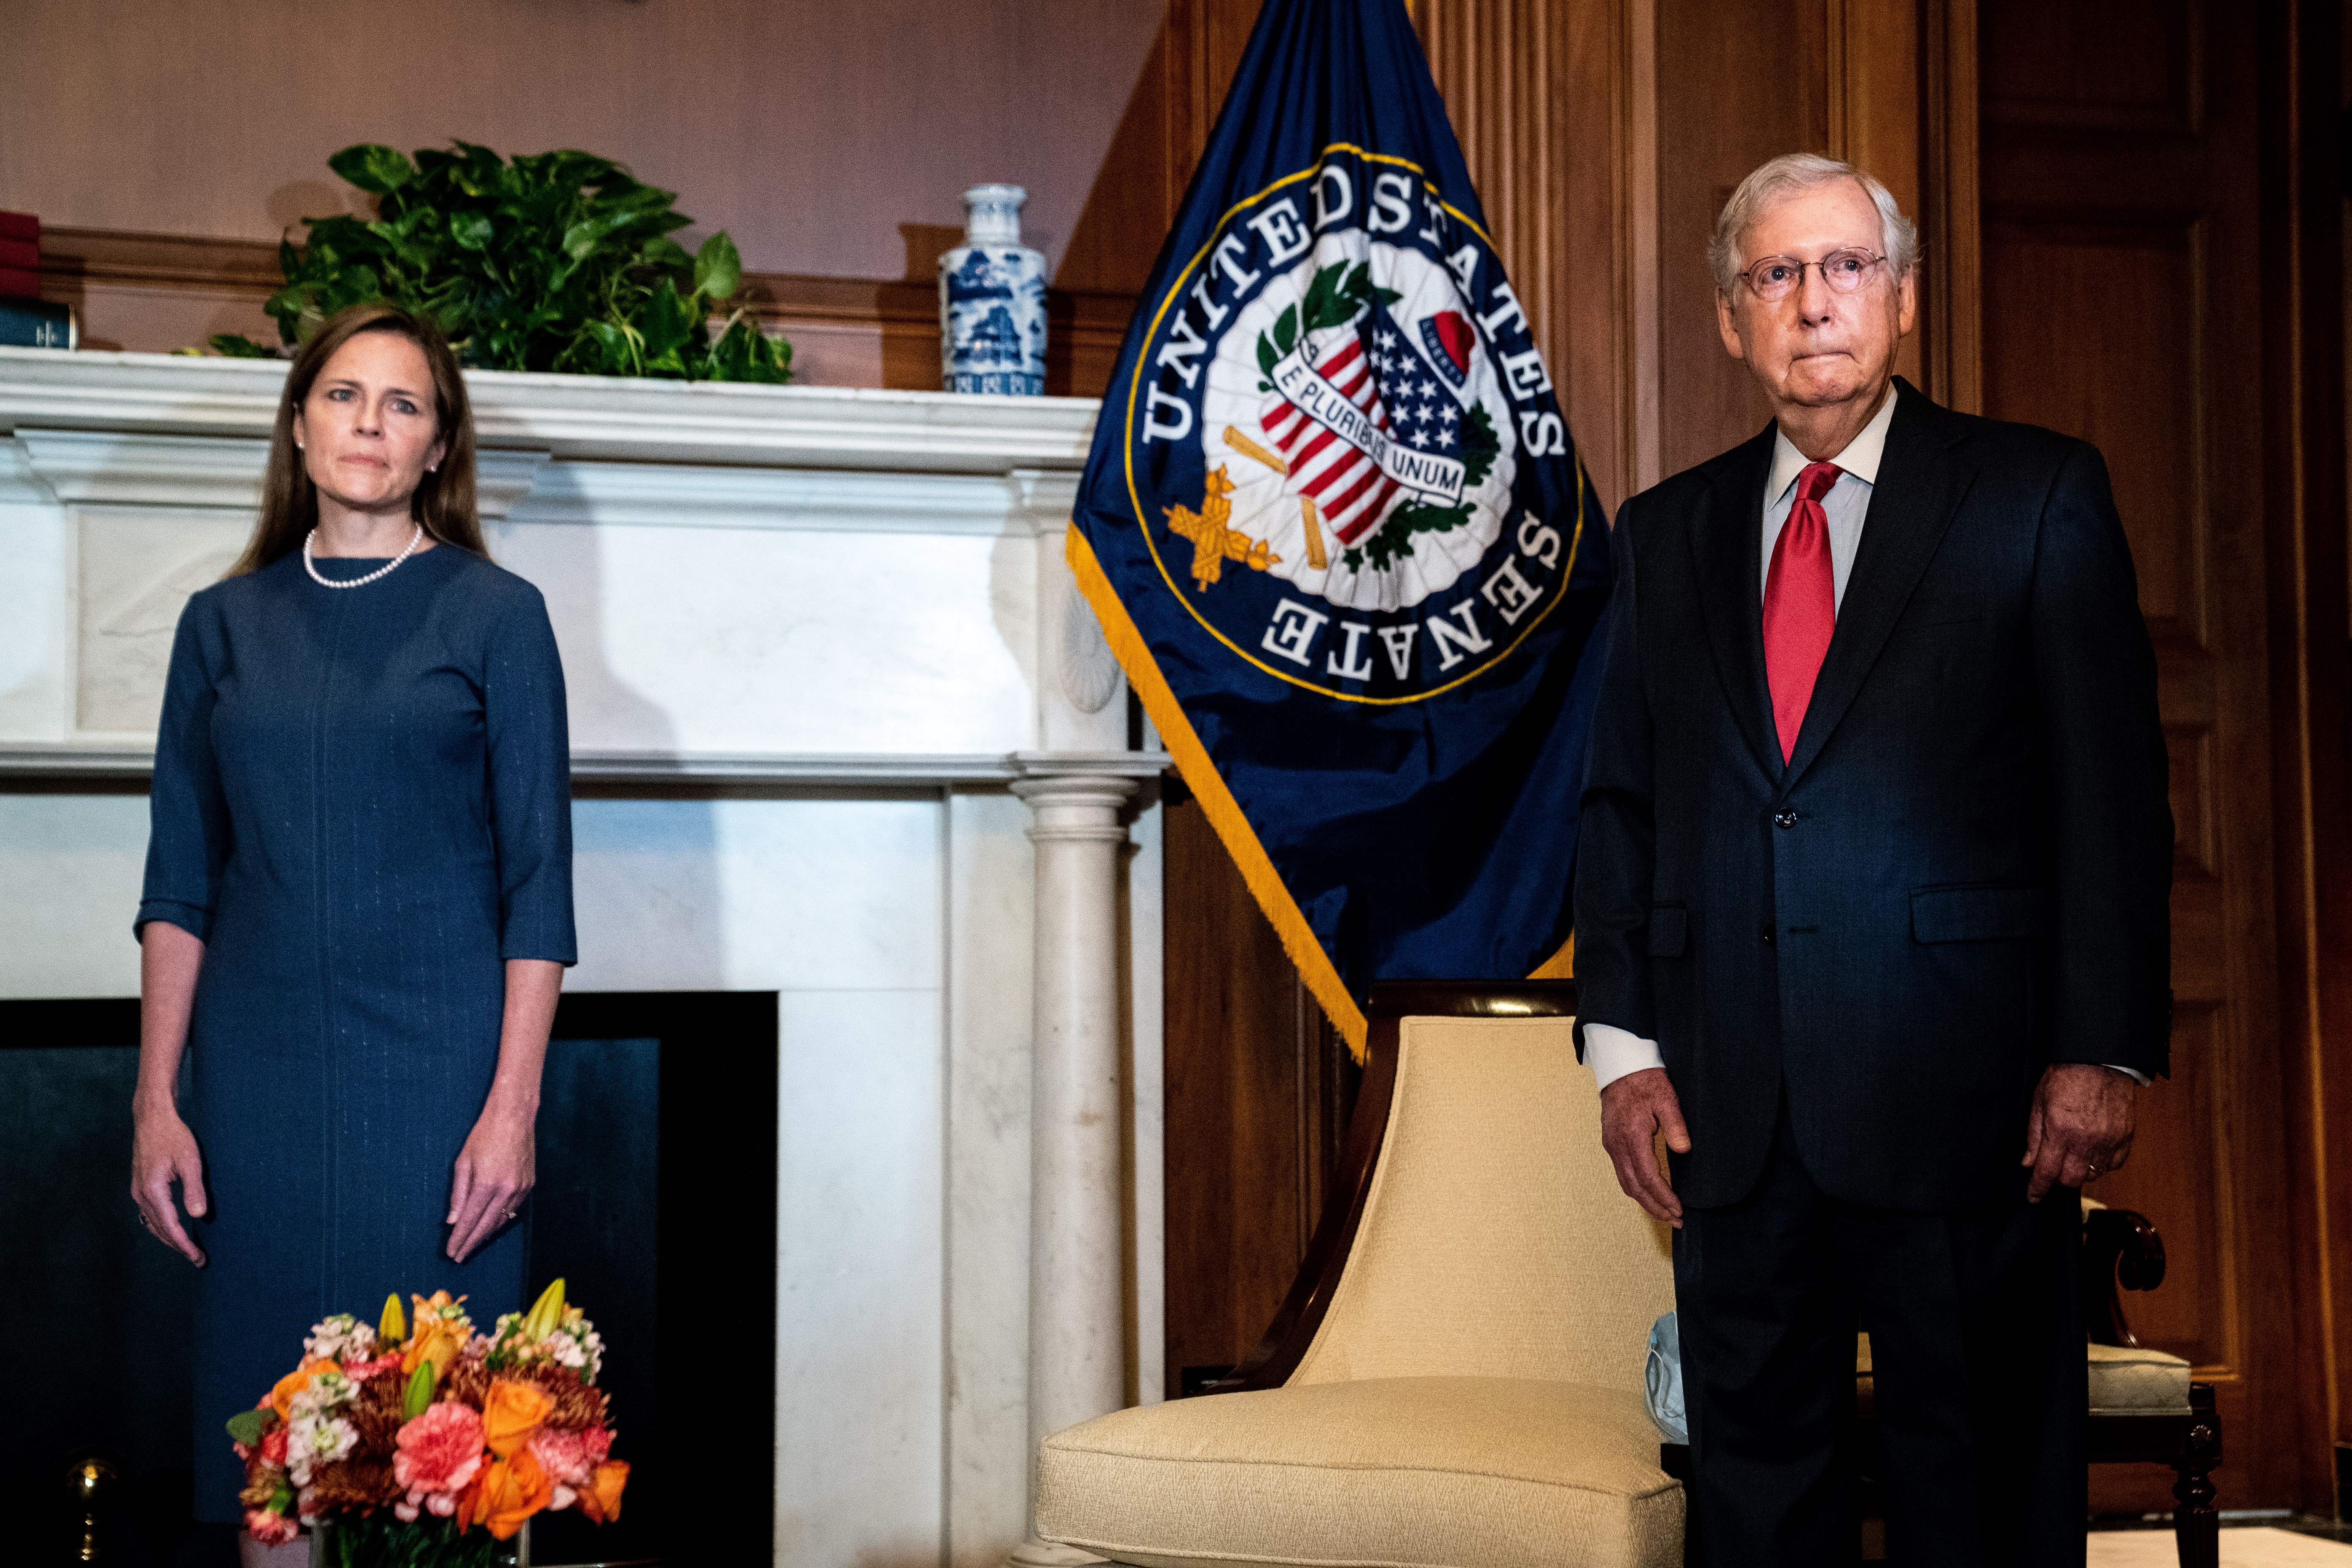 Mitch McConnell let the White House know on Thursday he wants the Trump team to stiffen their counter-Covid practices to protect staff and visitors.